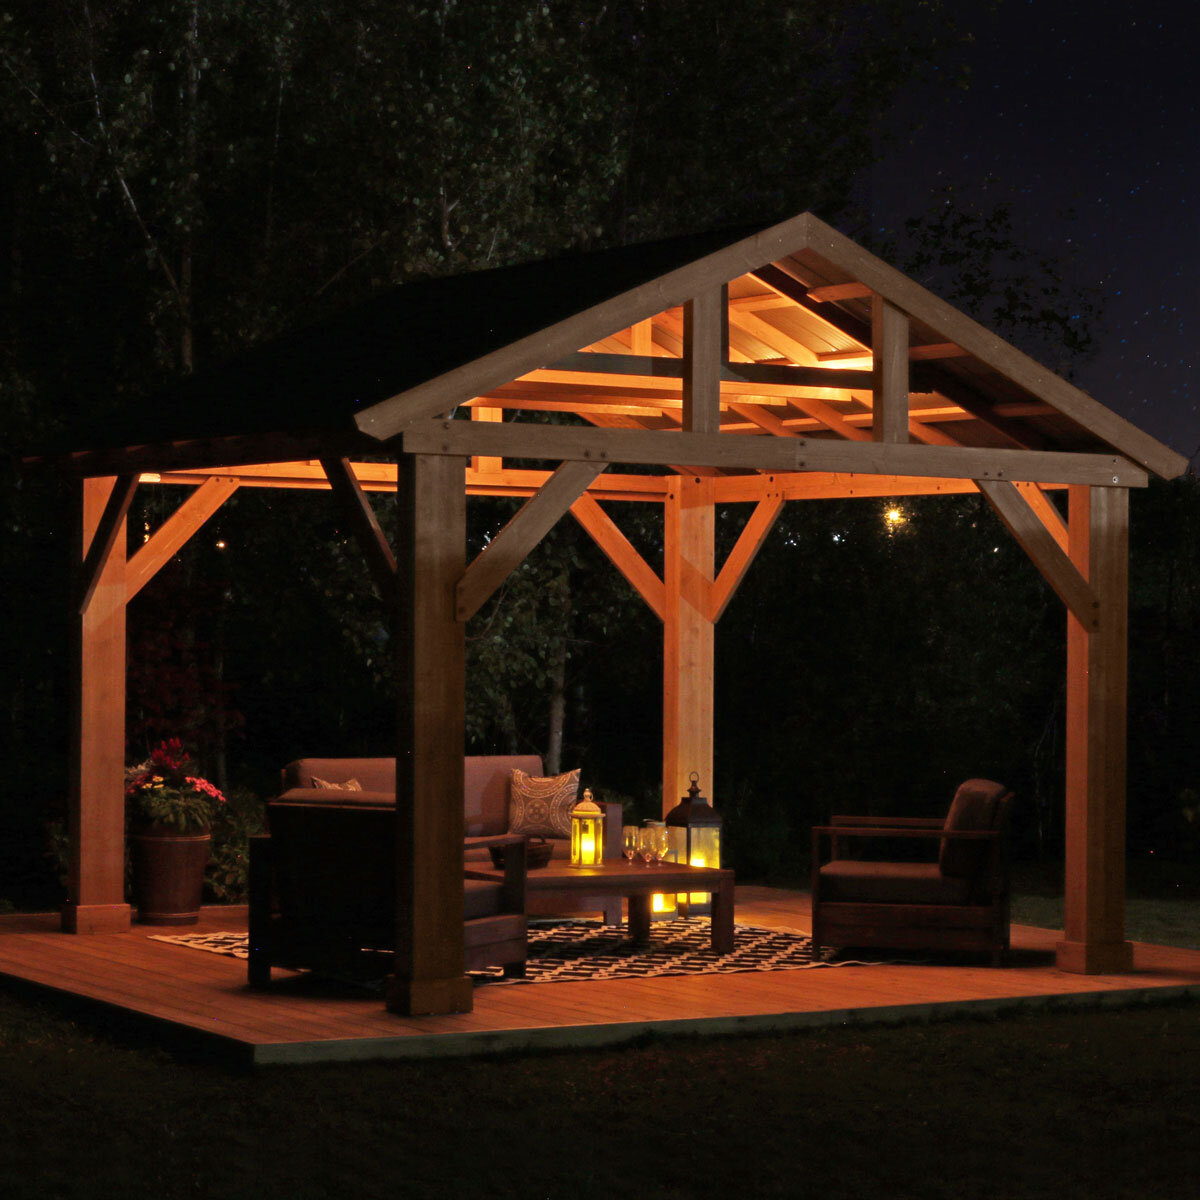 Yardistry 14ft x 12ft (4.3 x 3.7m) Wooden Pavilion  with Aluminium Roof